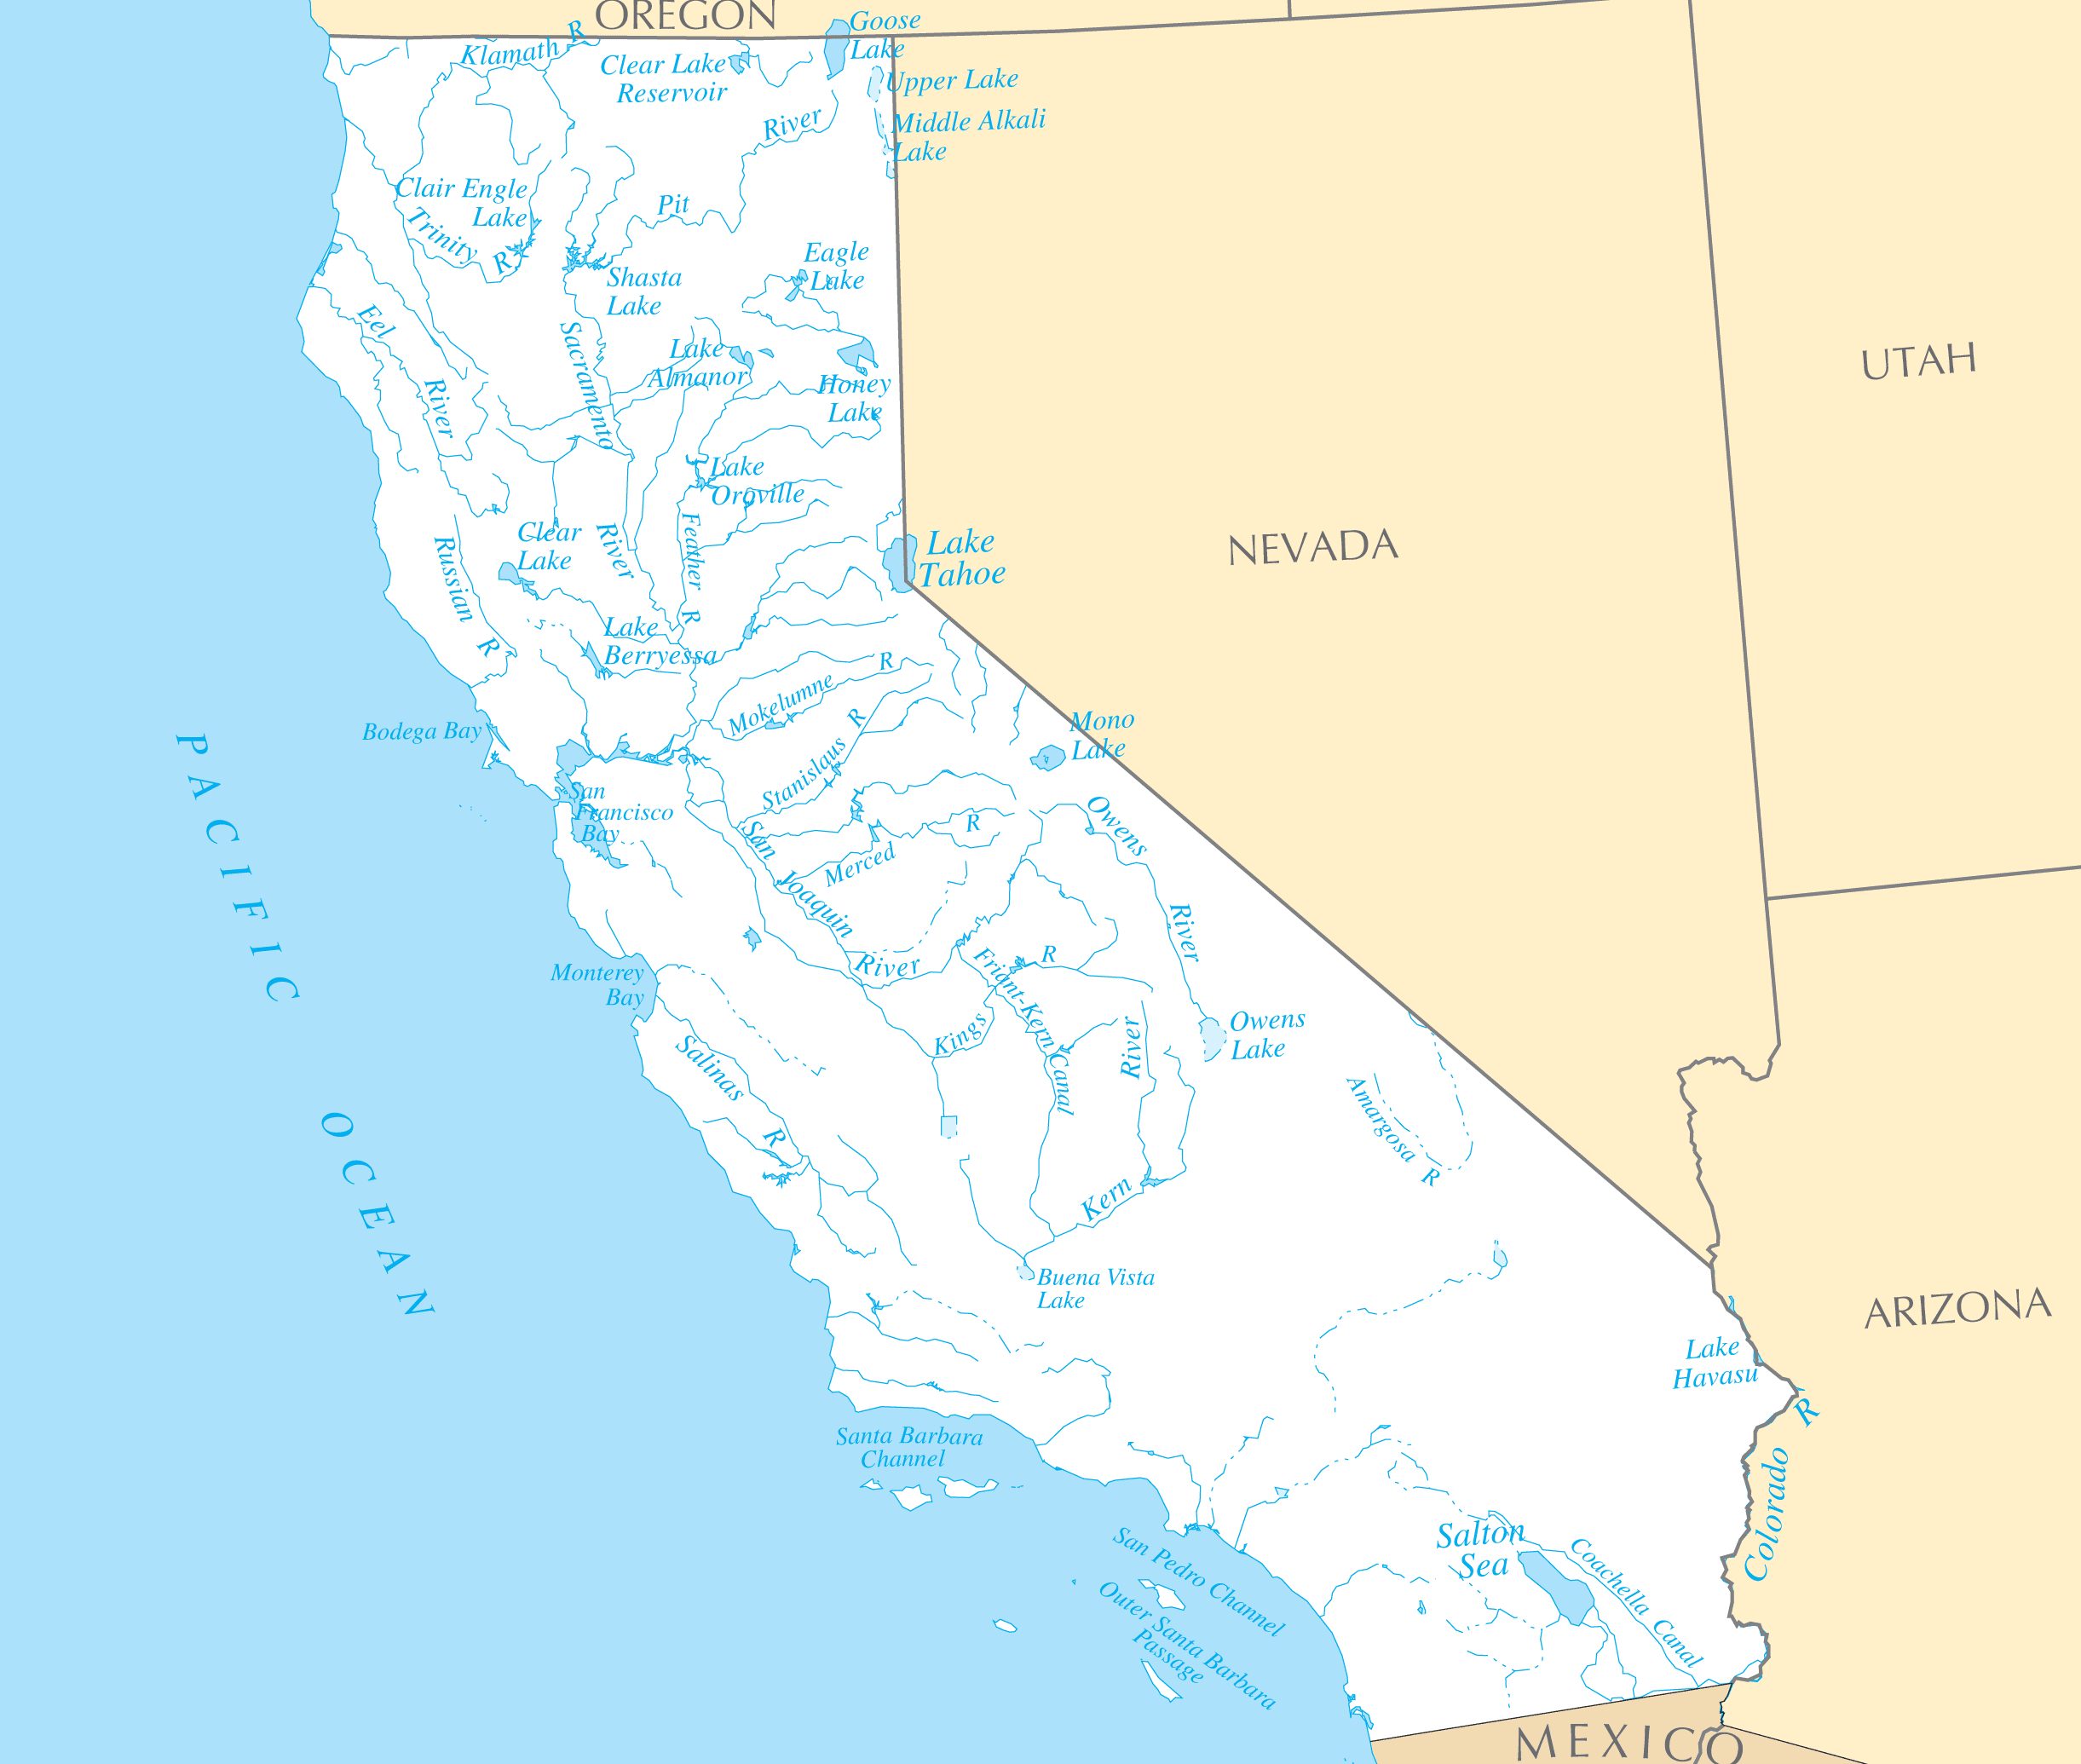 California Rivers And Lakes • Mapsof - Southern California Rivers Map